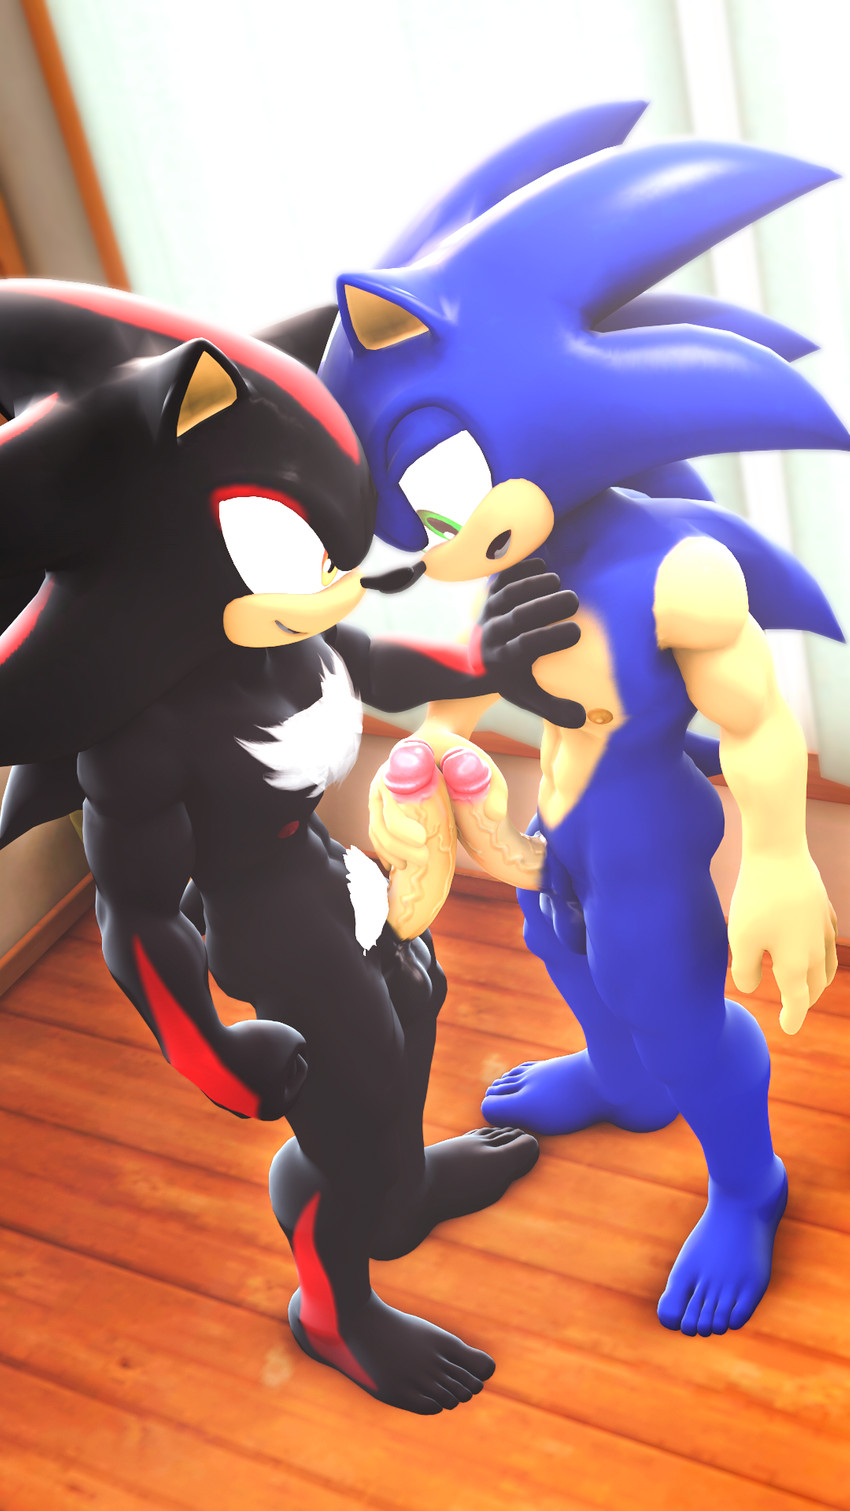 shadow the hedgehog and sonic the hedgehog (sonic the hedgehog (series) and etc) created by loafsfm